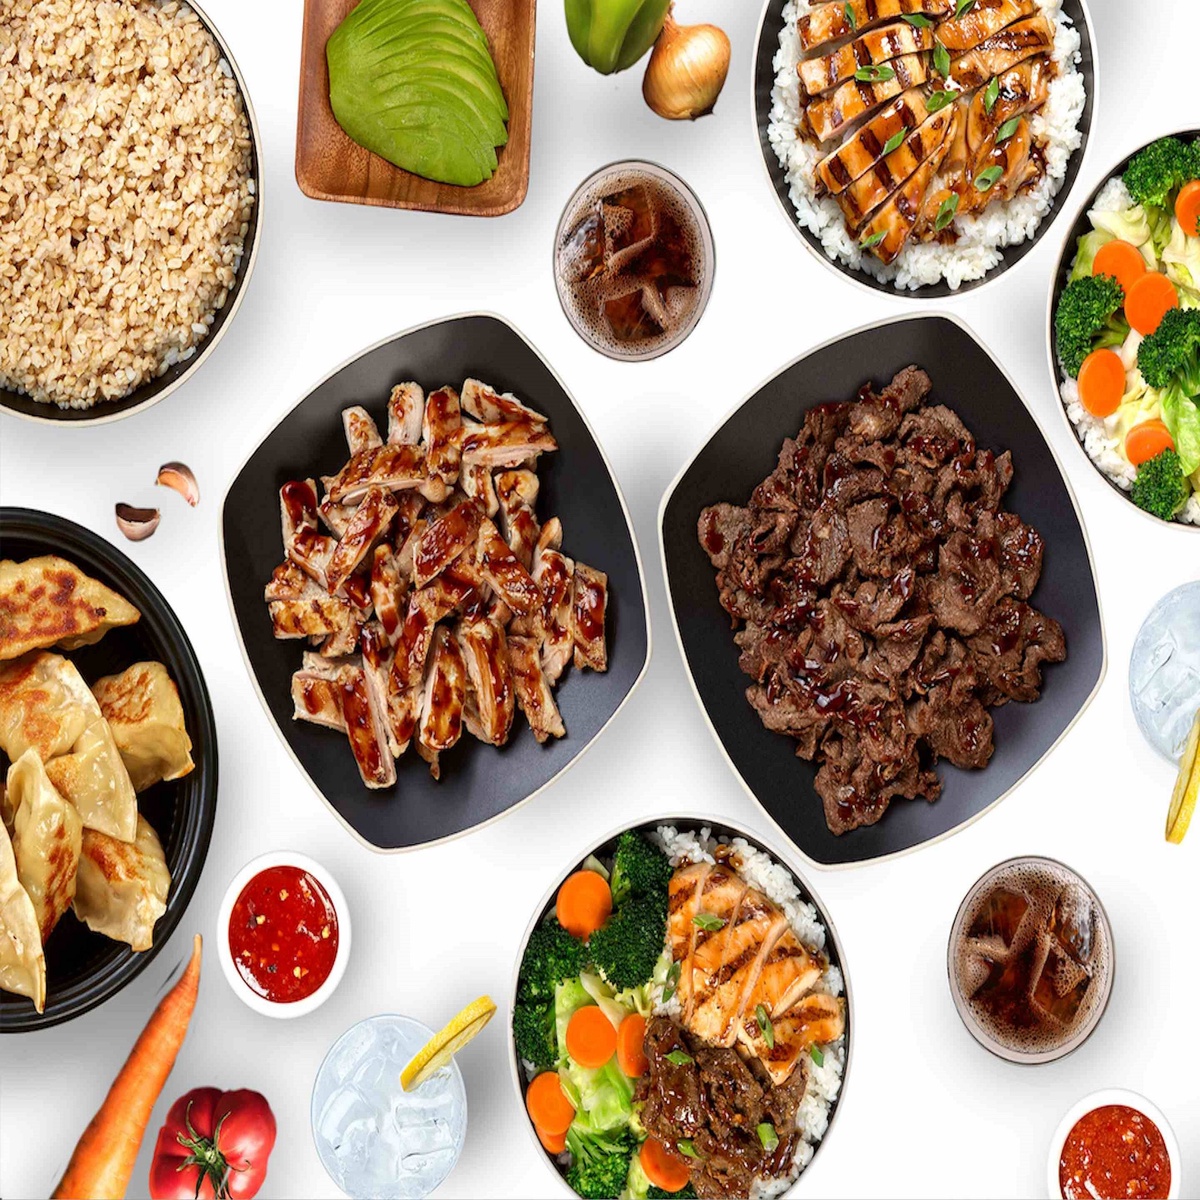 Waba Grill Menu: Locations and Prices – Fresh and Healthy Food